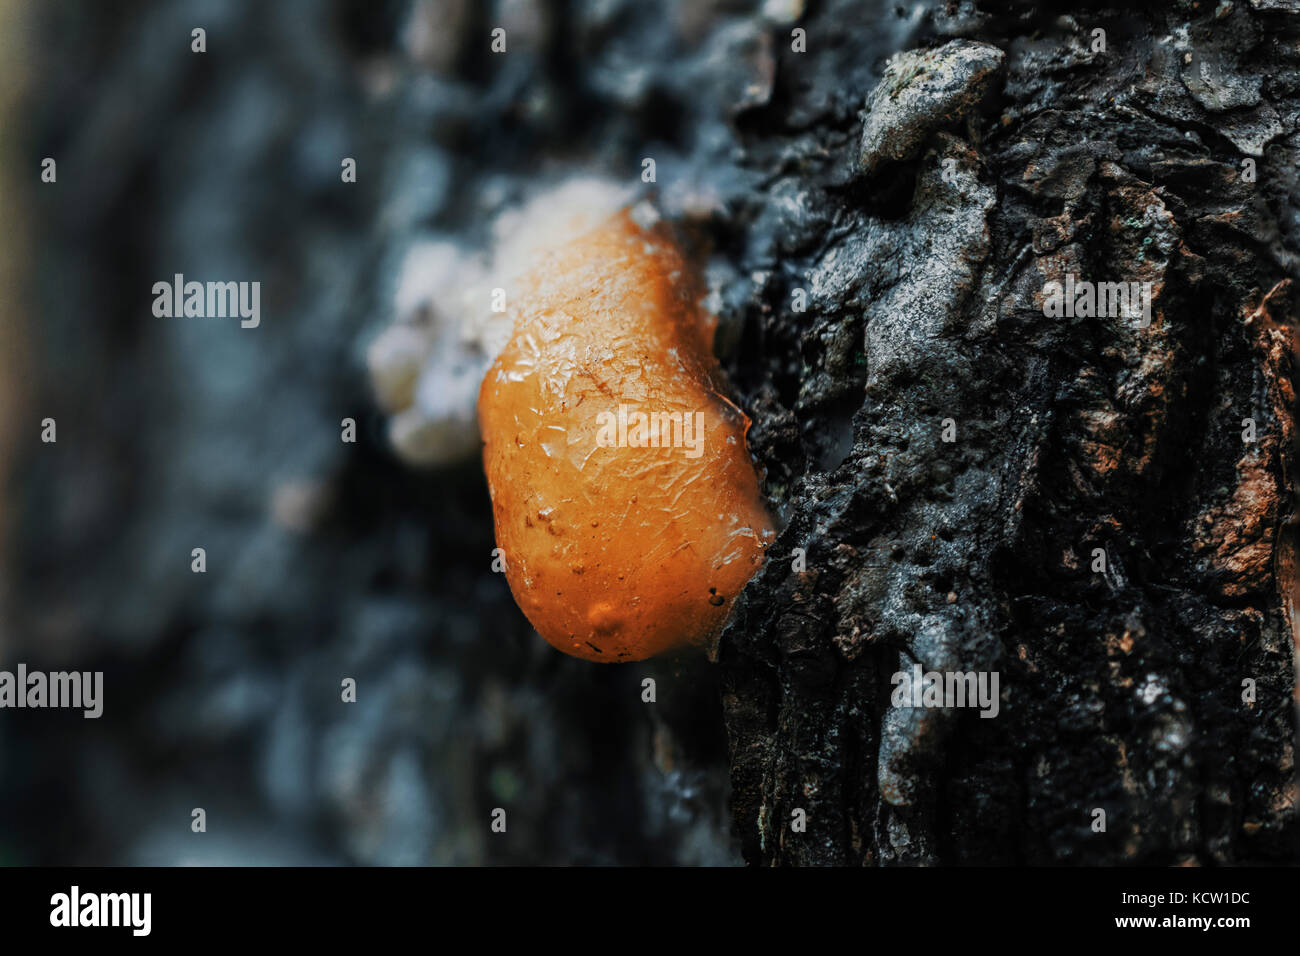 Extreme Close-Up Of Dried Orange Amber Resin With Air Bubbles On Tree Bark Stock Photo